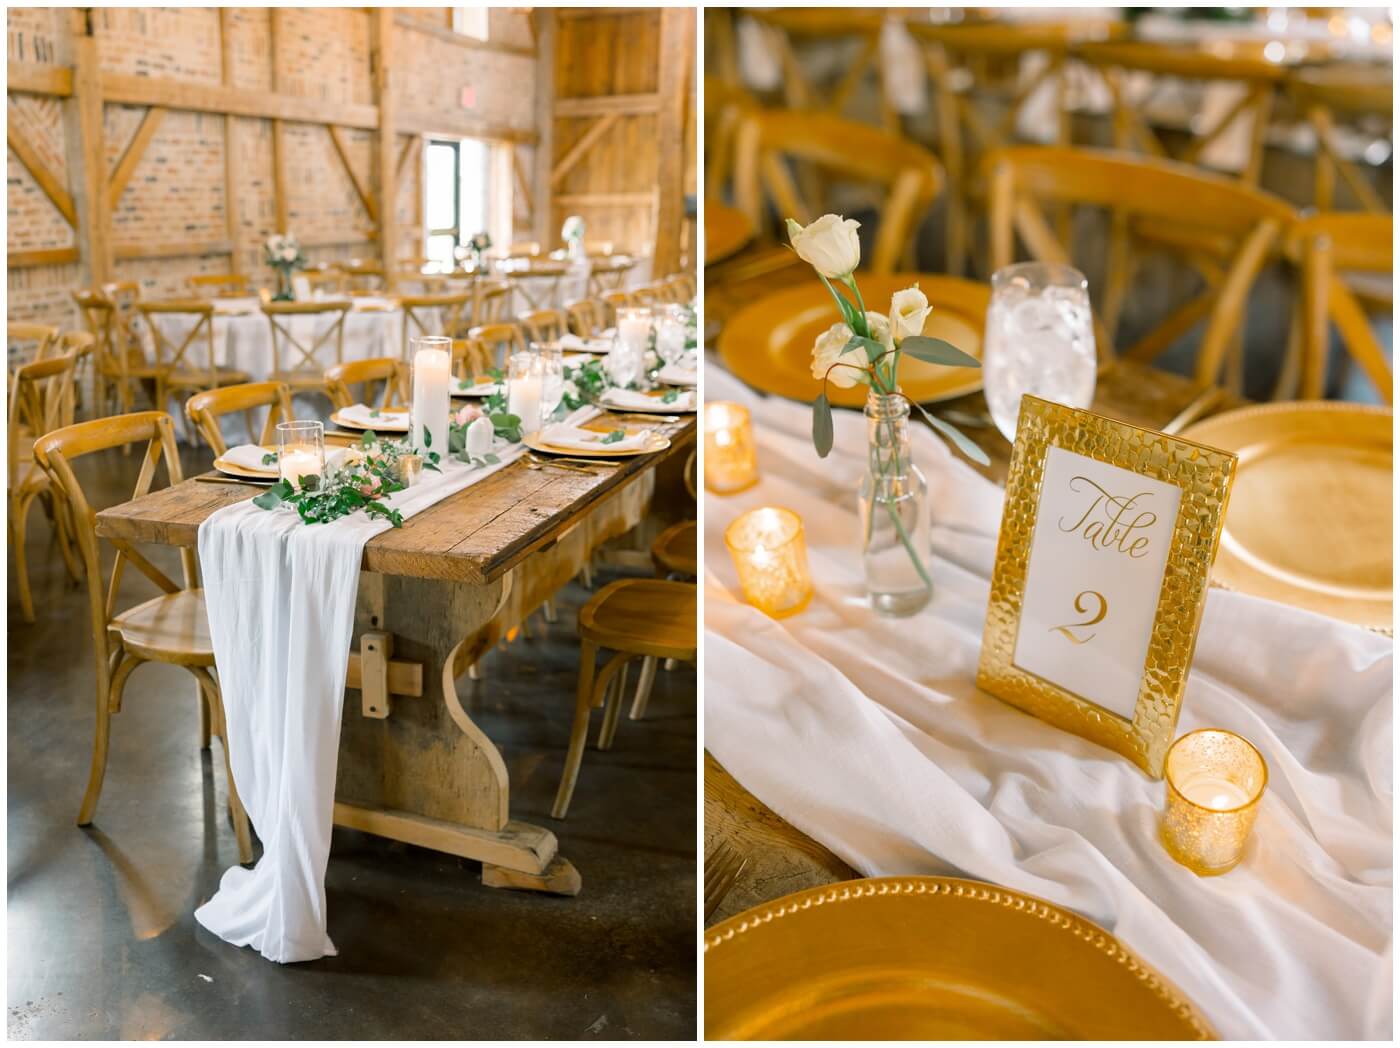 The reception space is beautifully prepared with flowers and greenery